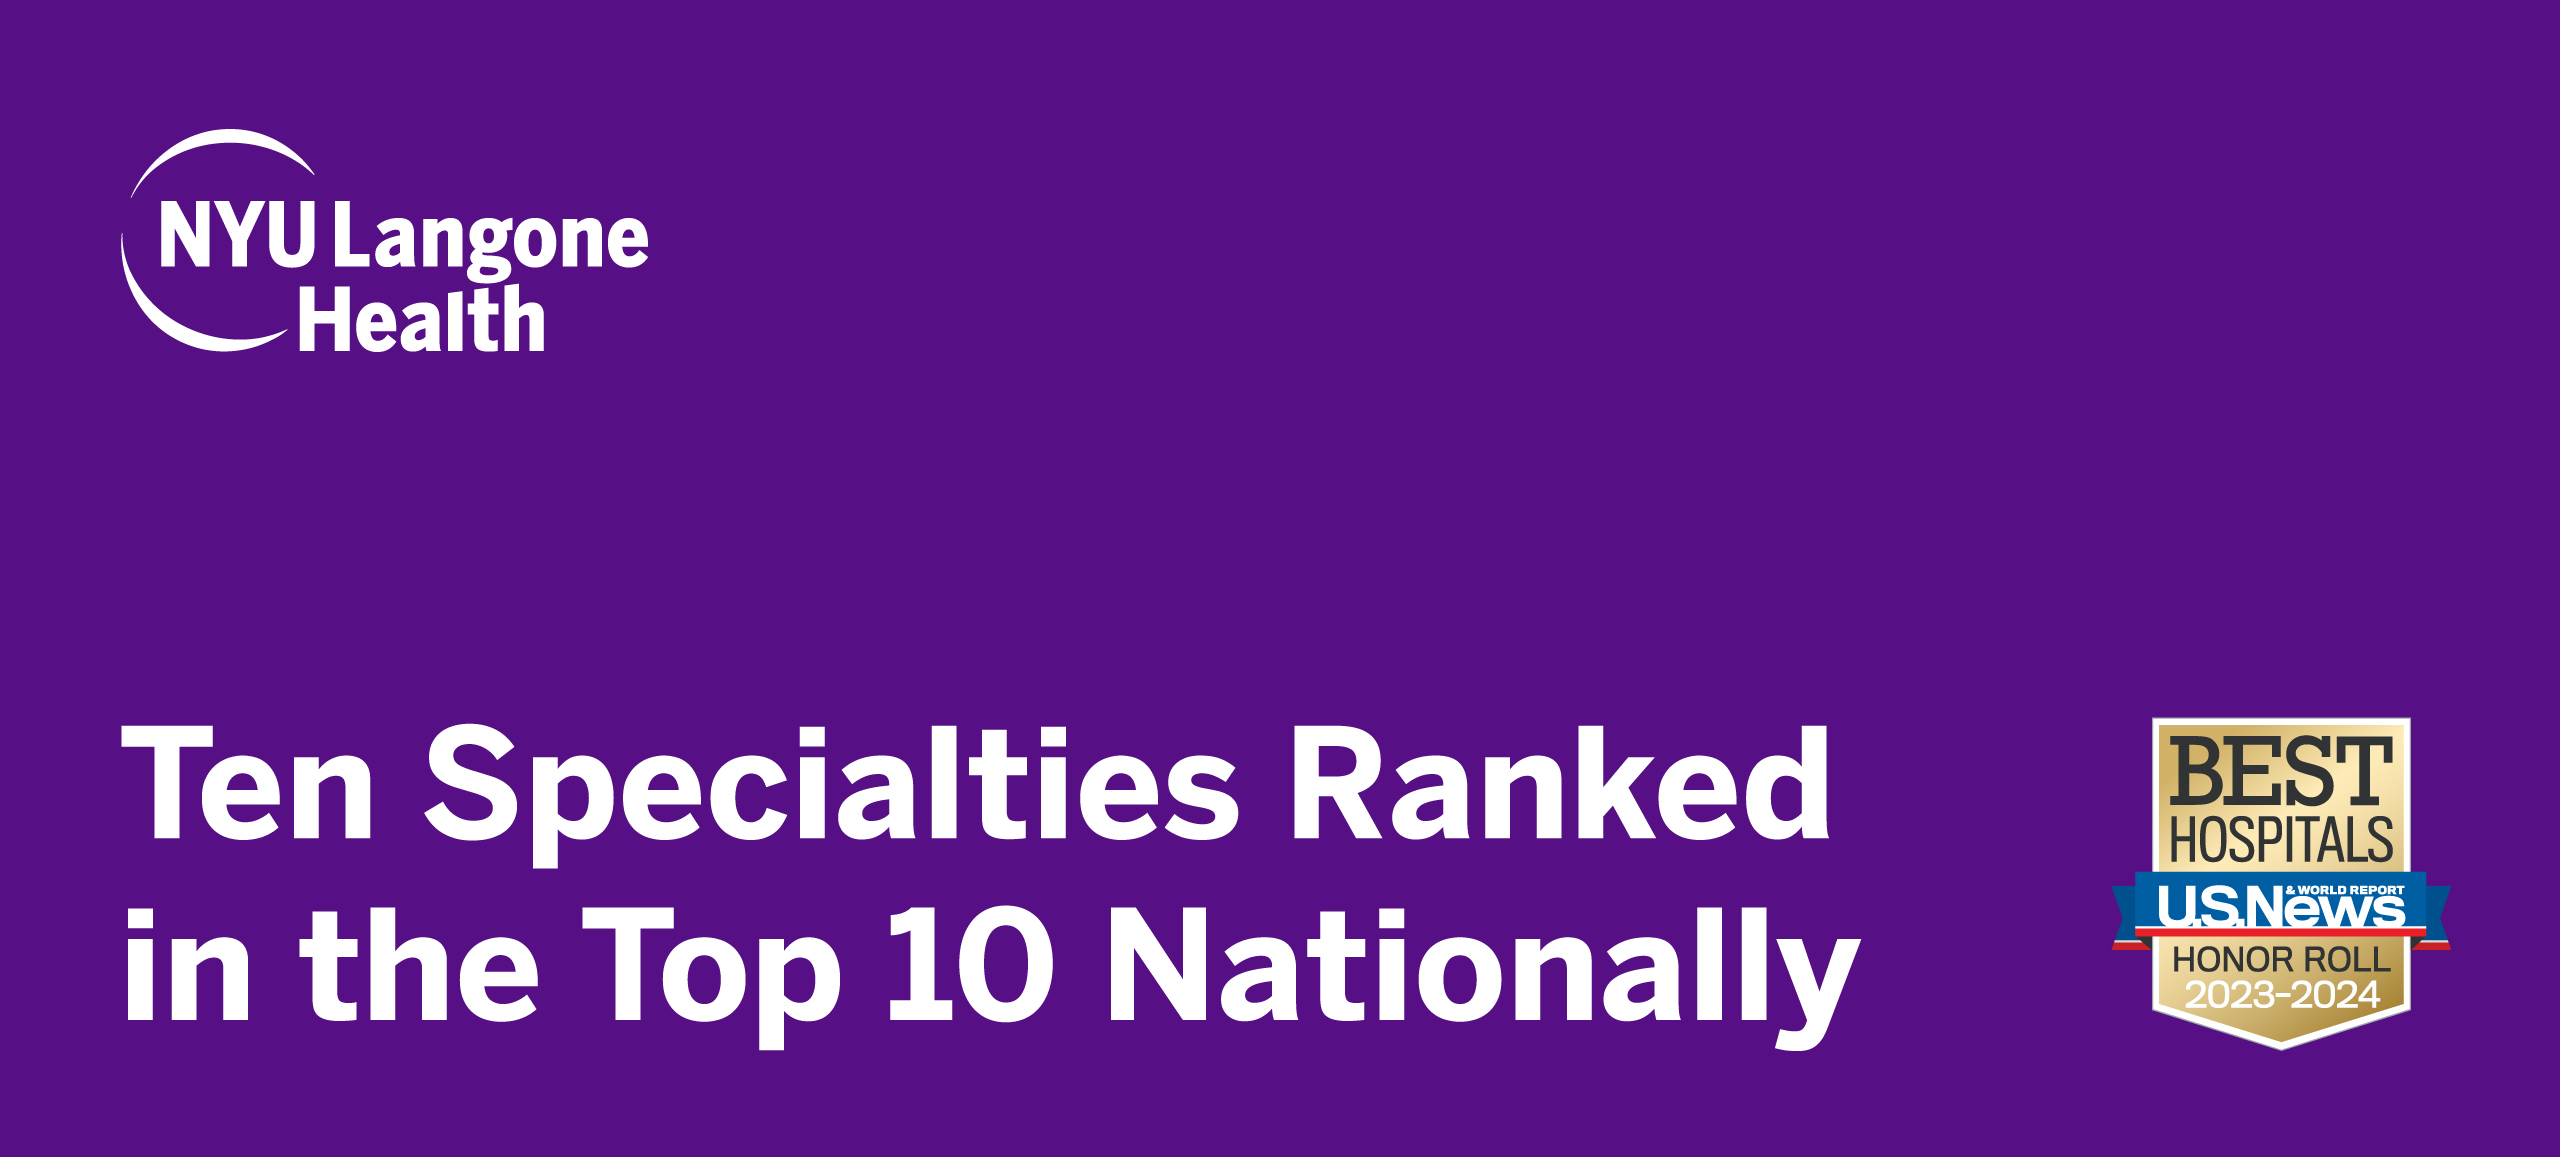 10 specialties ranked in the top 10 nationally 2023